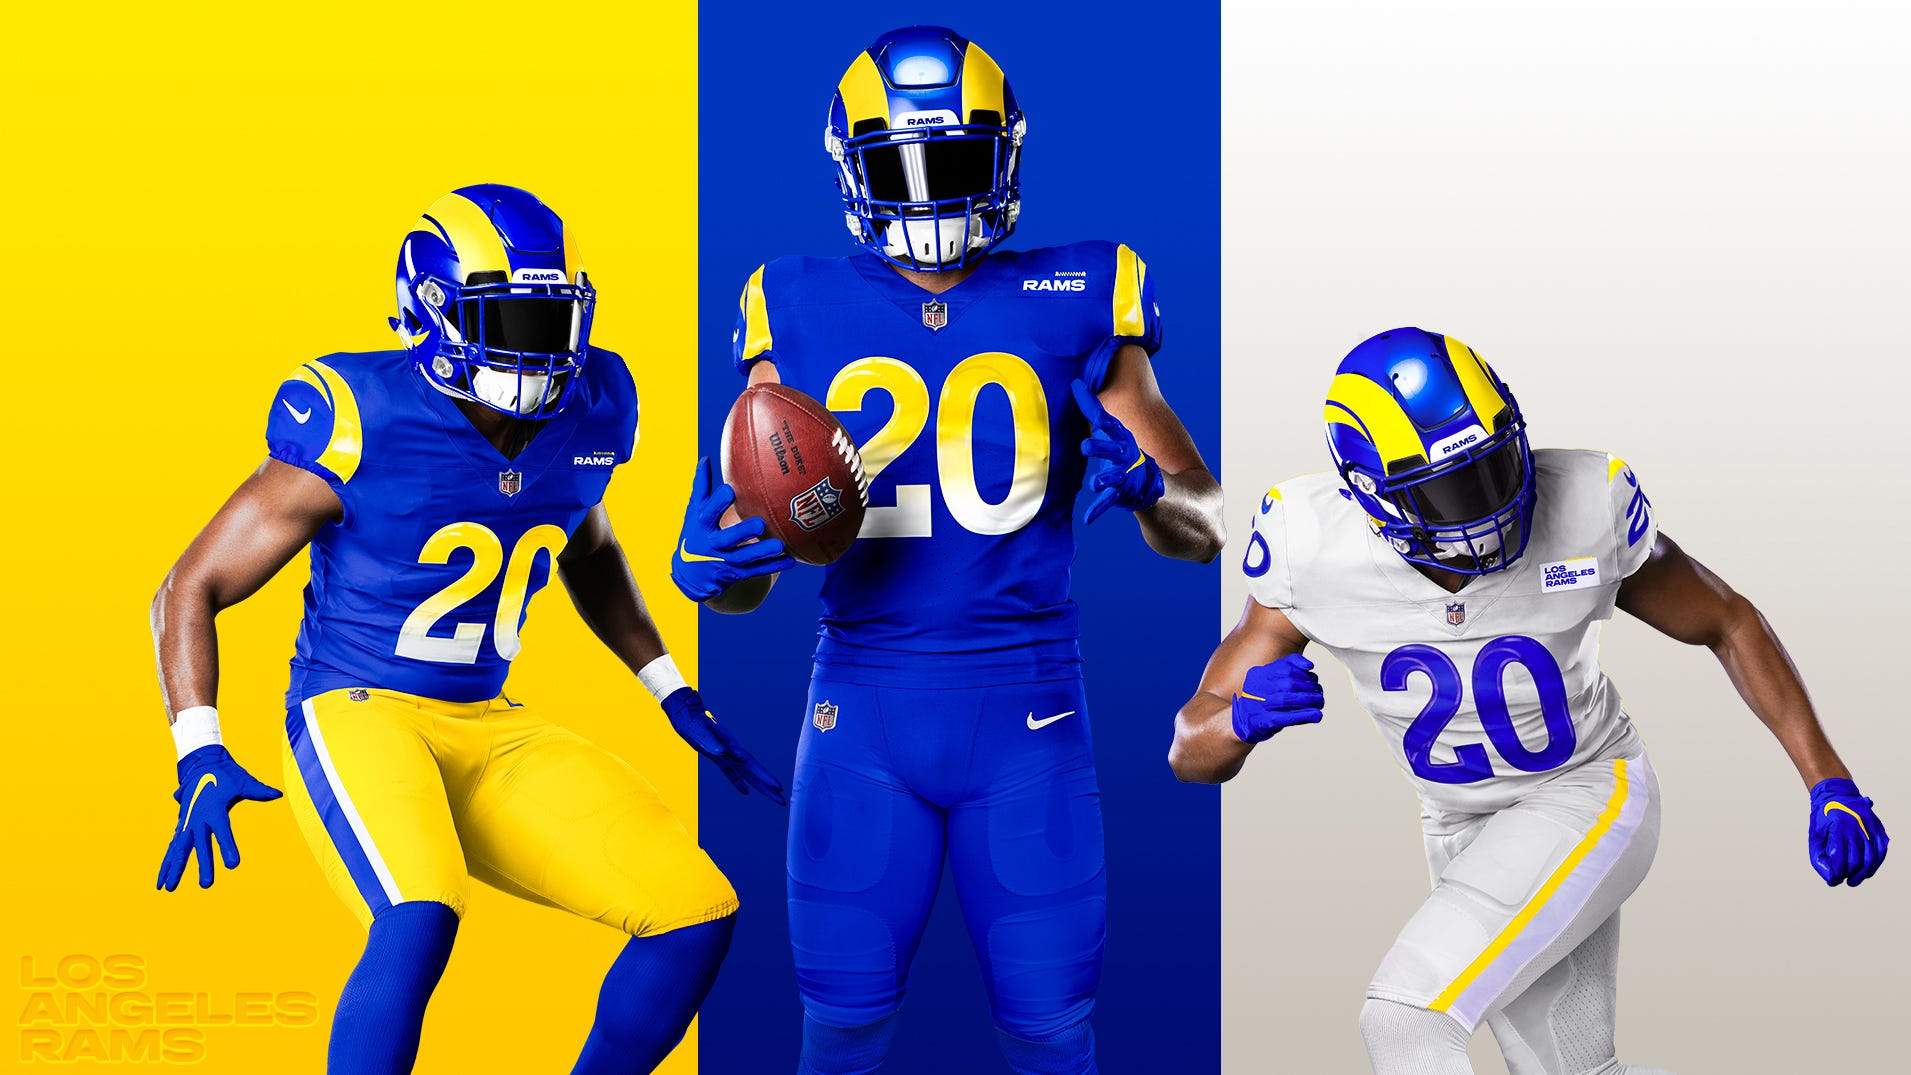 Los Angeles Rams' new uniforms: Jersey redesign unveiled in new photos